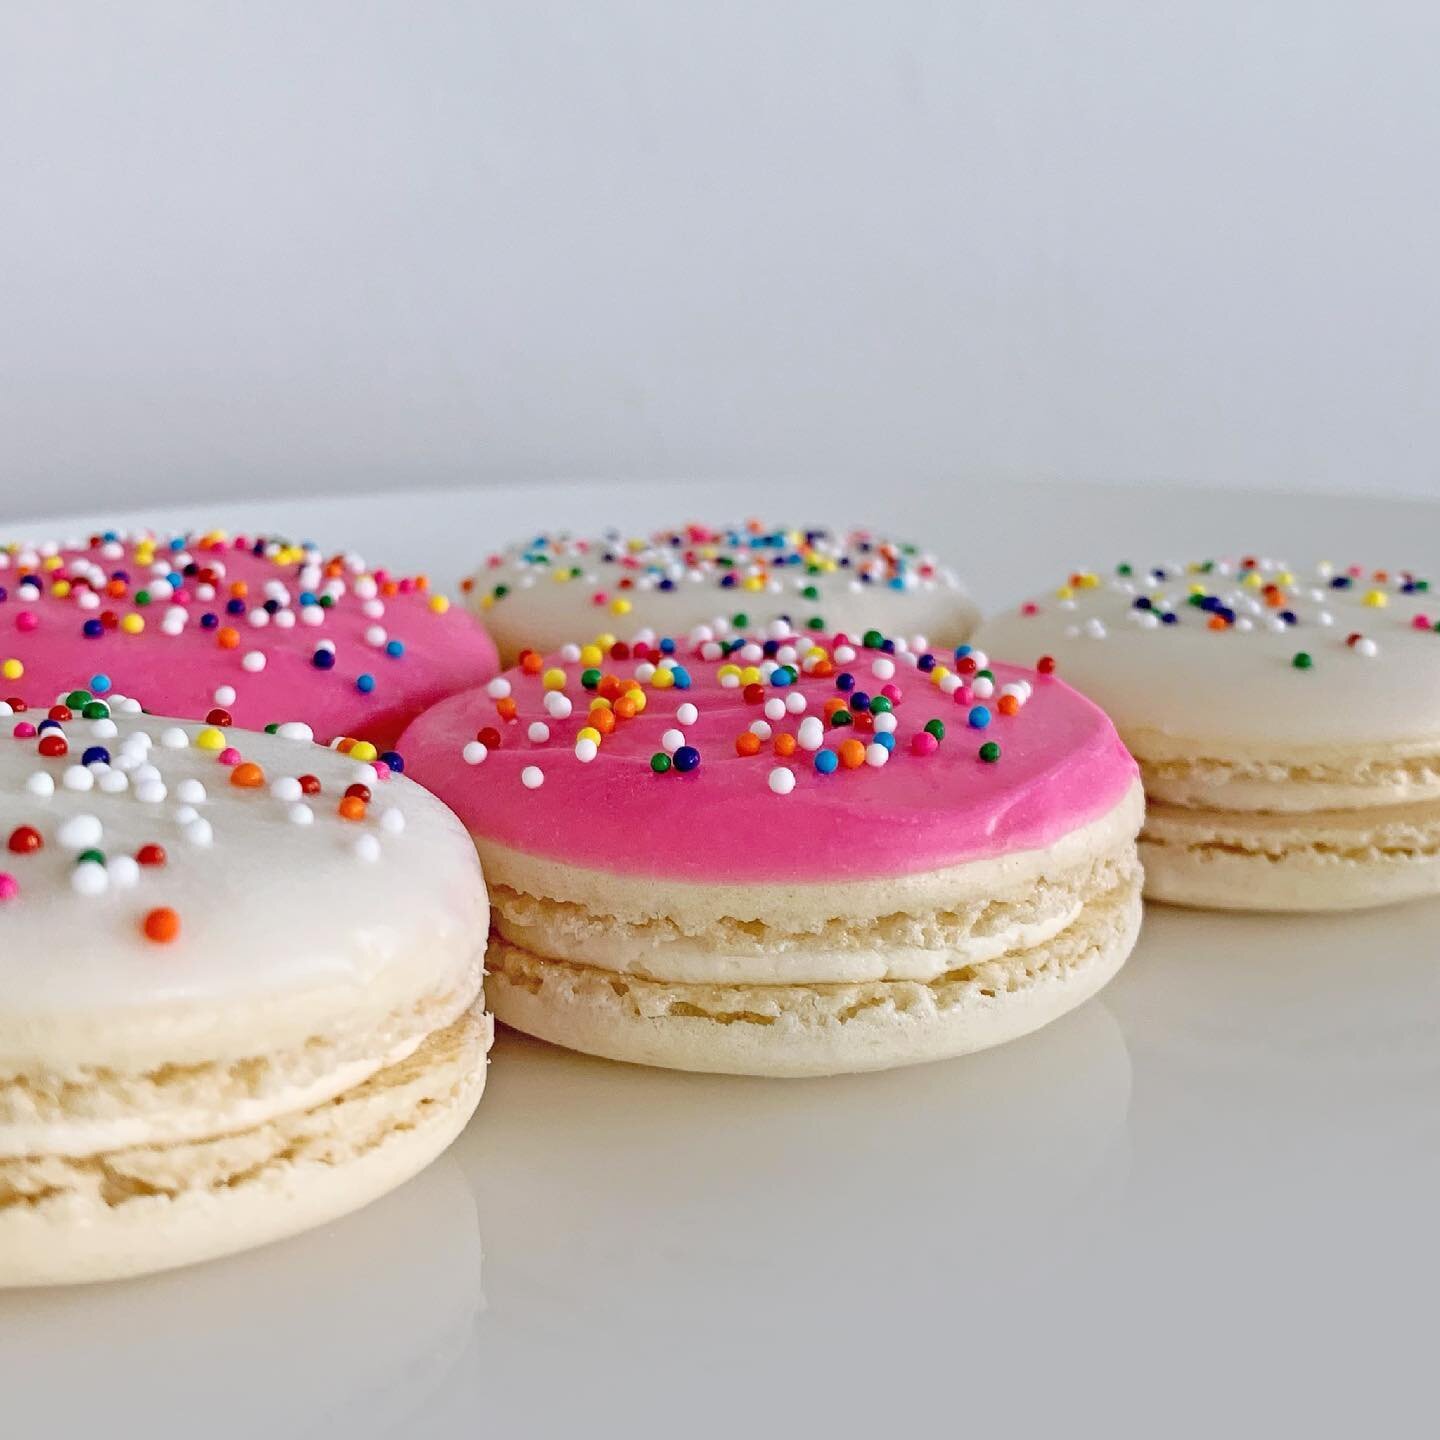 animal cracker shells x vanilla buttercream + white chocolate top with sprinkles 
.
.
These macs were based on the circus animal cookies that we all grew up shoveling into our mouths. But after a little hiccup with using the wrong type of food colori